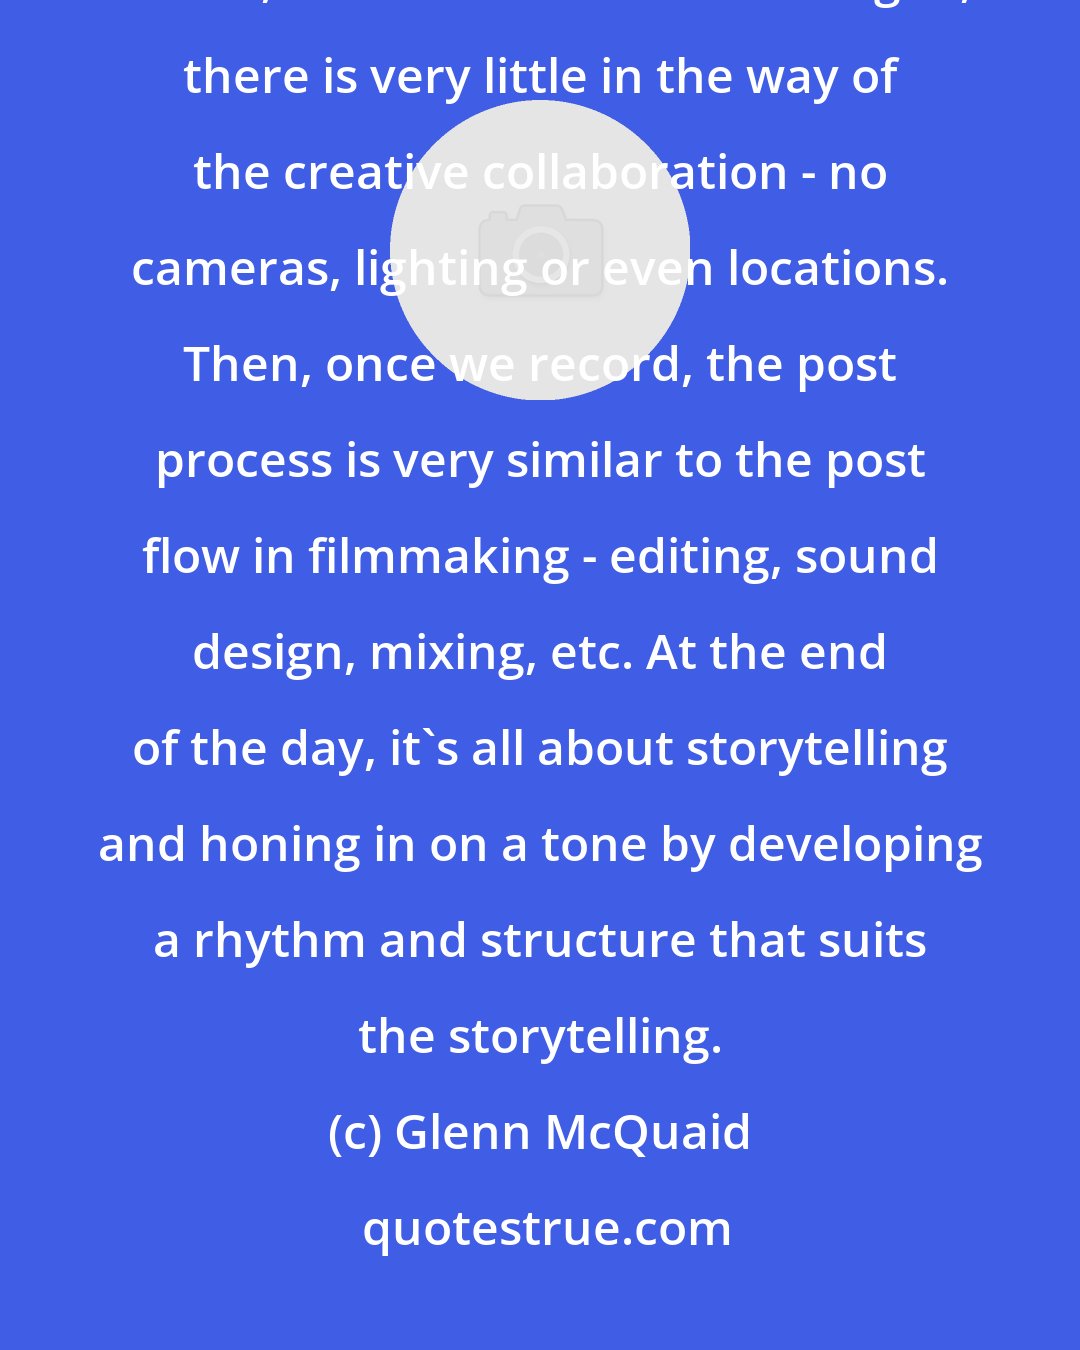 Glenn McQuaid: The relationship with actor and director is probably closer to theater, in that, when we record the dialogue, there is very little in the way of the creative collaboration - no cameras, lighting or even locations. Then, once we record, the post process is very similar to the post flow in filmmaking - editing, sound design, mixing, etc. At the end of the day, it's all about storytelling and honing in on a tone by developing a rhythm and structure that suits the storytelling.